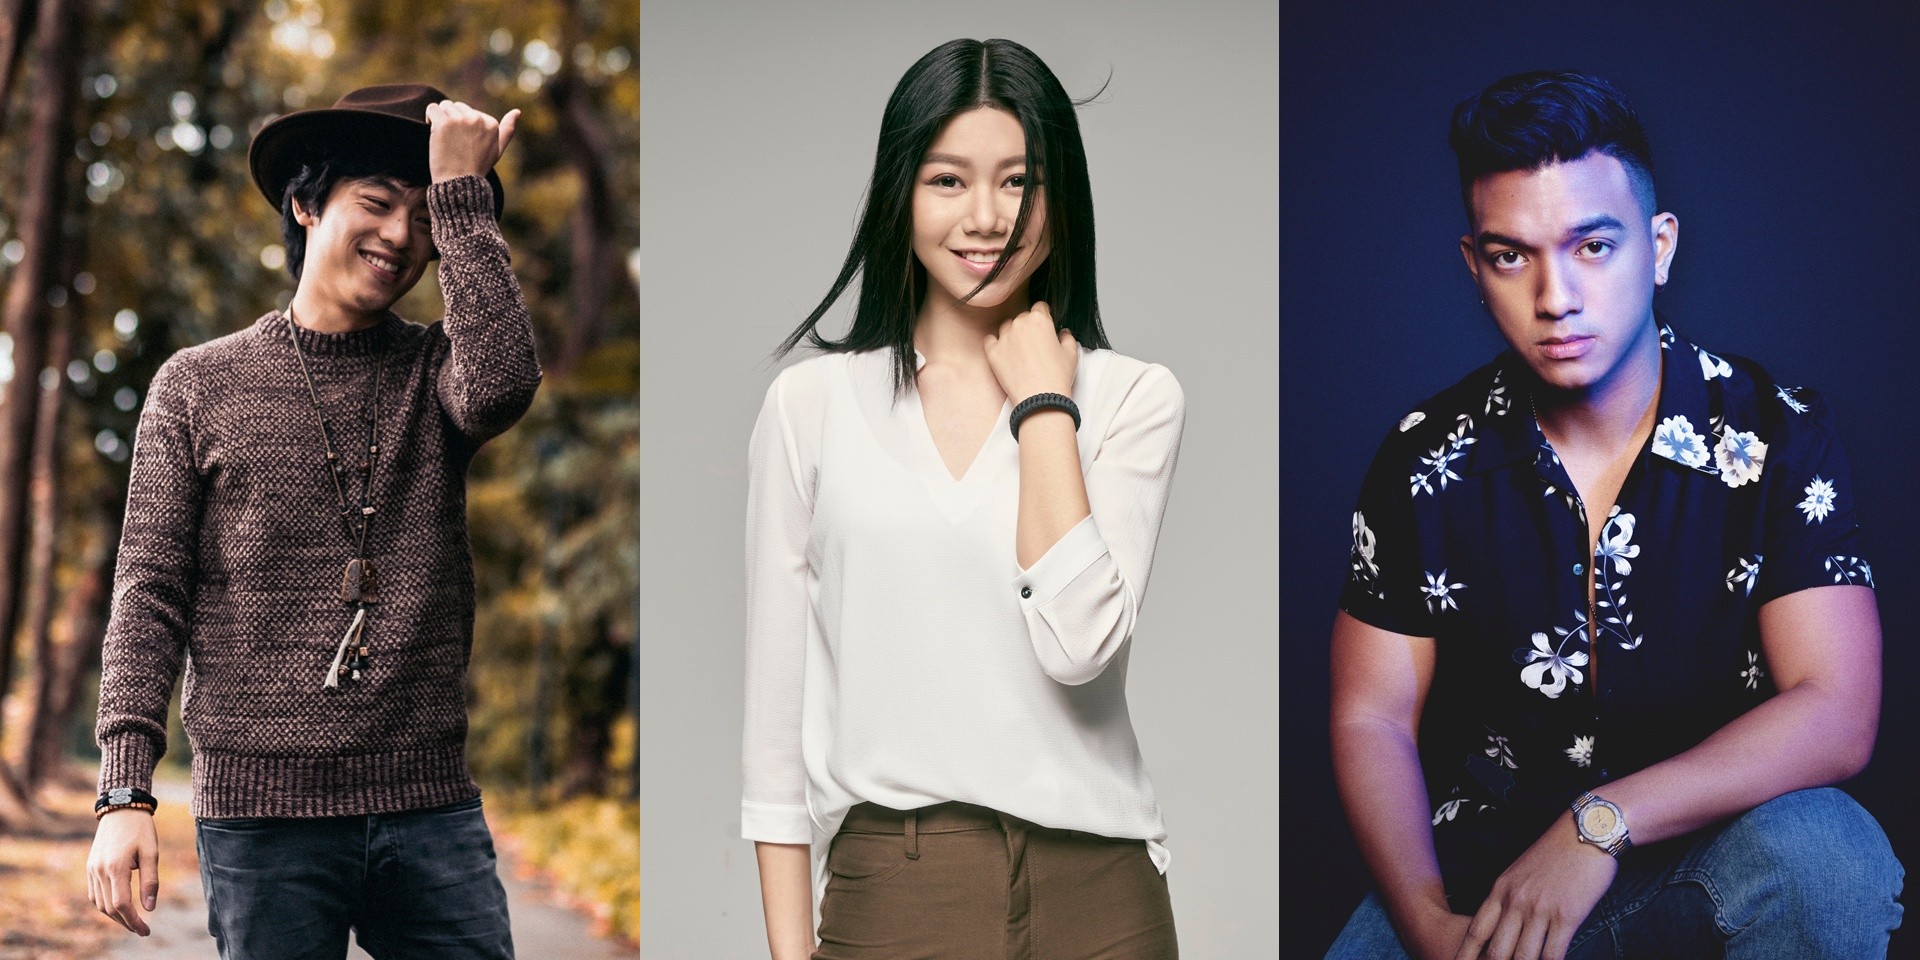 Marina Bay Sands' concert series Open Stage returns this month with Priscilla Abby, Gareth Fernandez and Dru Chen